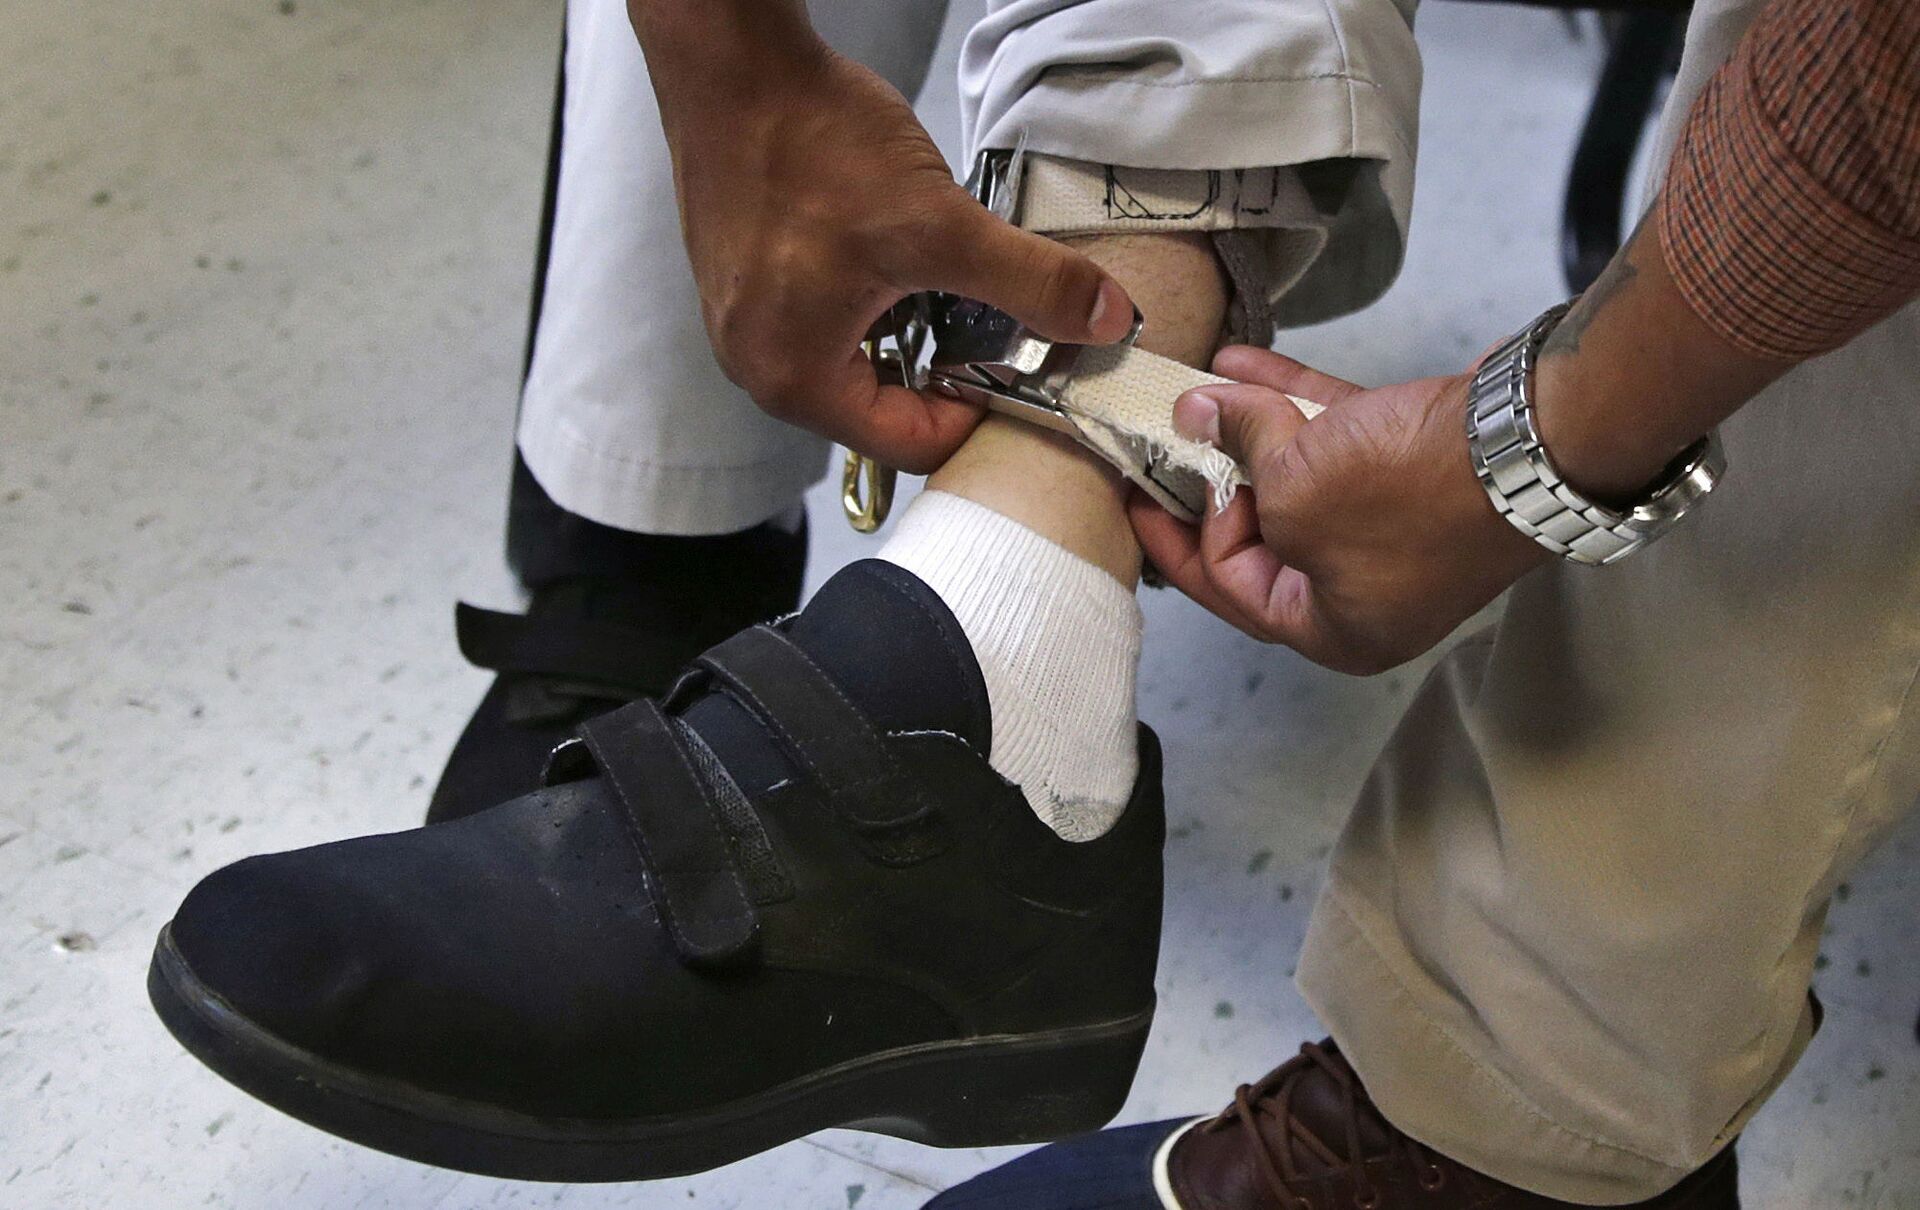 In this Aug. 13, 2014 file photo, a therapist checks the ankle strap of an electrical shocking device on a student during an exercise program at the Judge Rotenberg Educational Center in Canton, Mass. The student, who was born with a developmental disorder, wears the device so administrators can control violent episodes. - Sputnik International, 1920, 07.09.2021